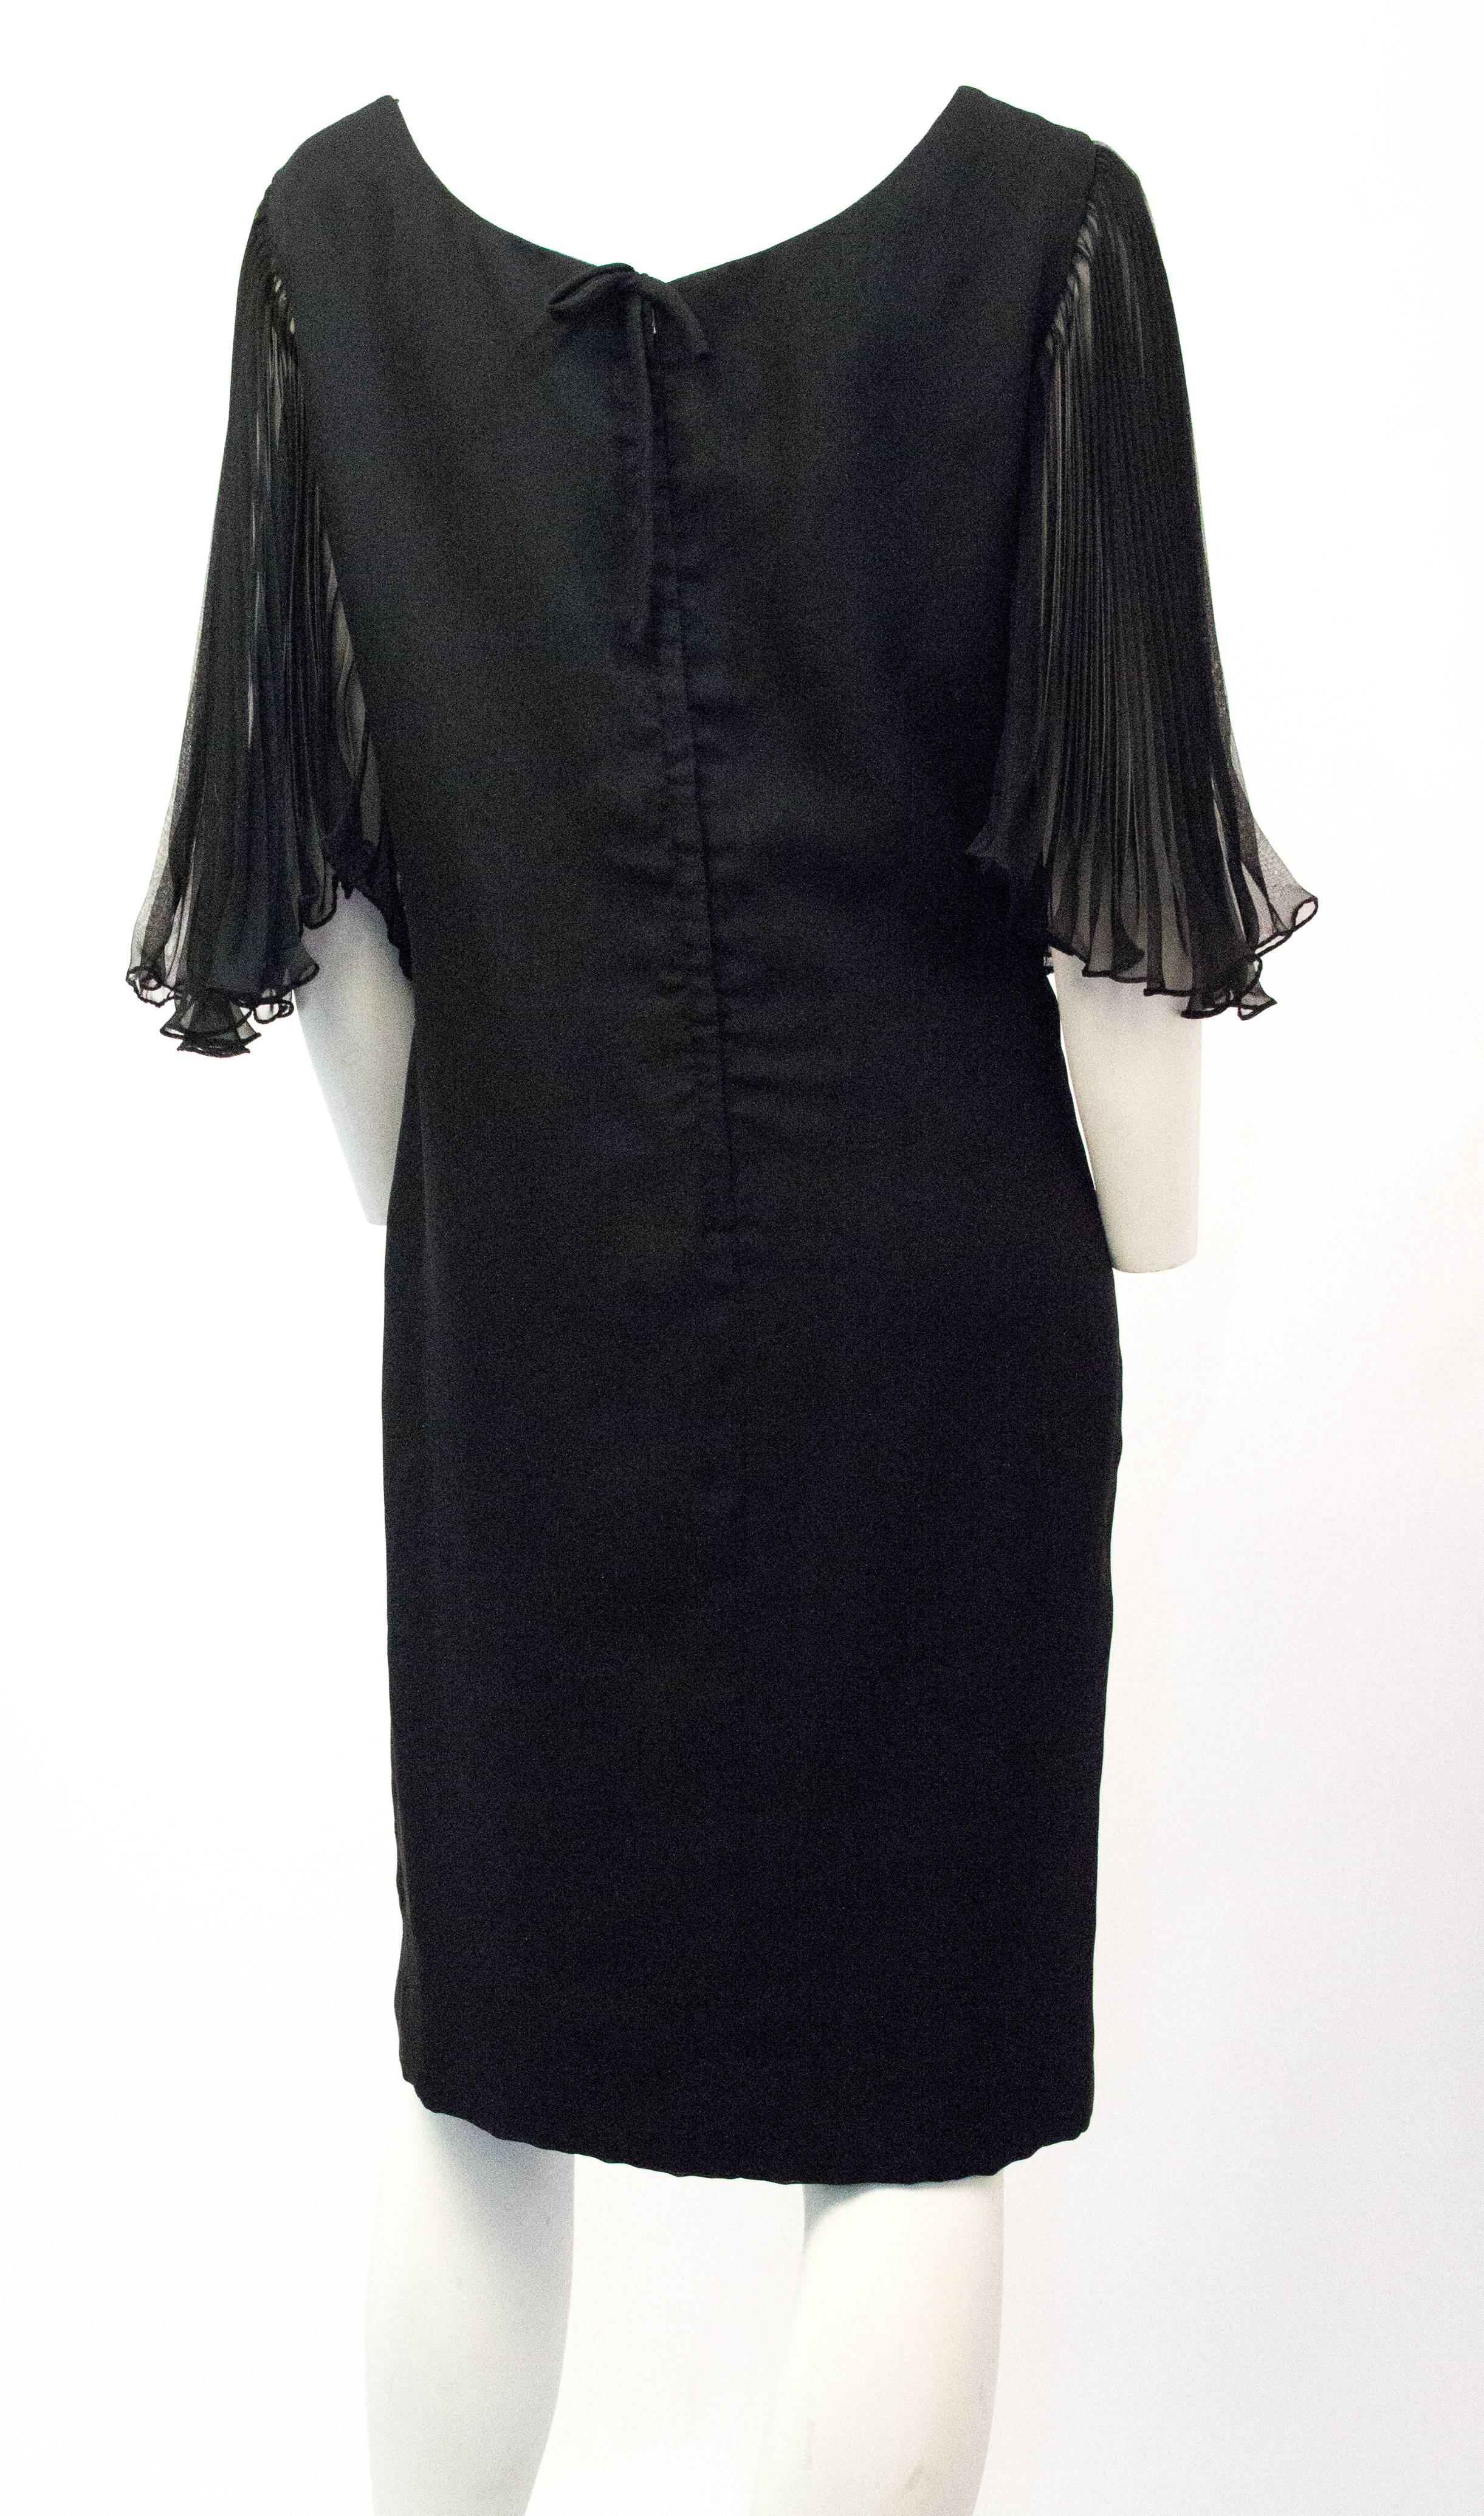 70s Miss Elliette black cocktail dress with pleated chiffon butterfly sleeves. Body of dress is made from one layer of acetate with two over layers of chiffon. Fully lined. Metal zipper up the back. 